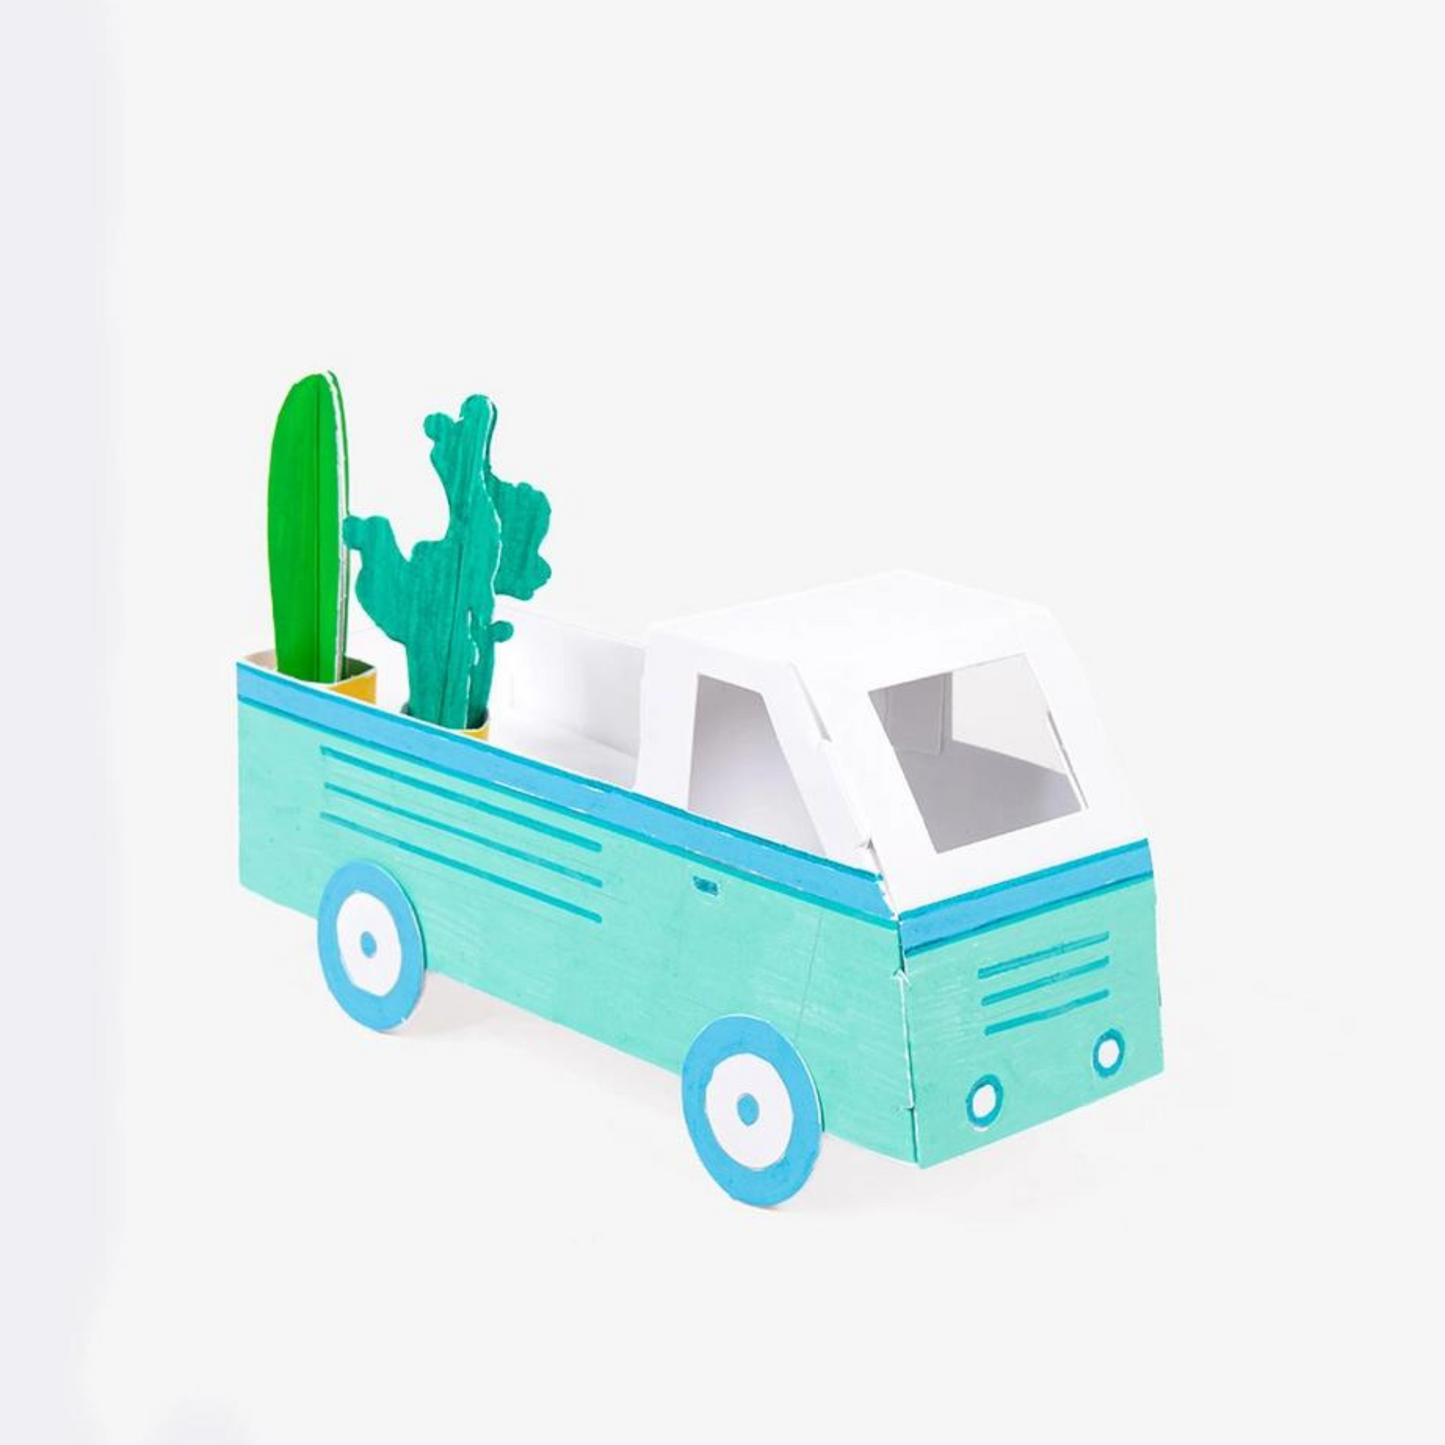 Holiday Eco Friendly Paper Toy Gift To Color and Build - Botanic Garden